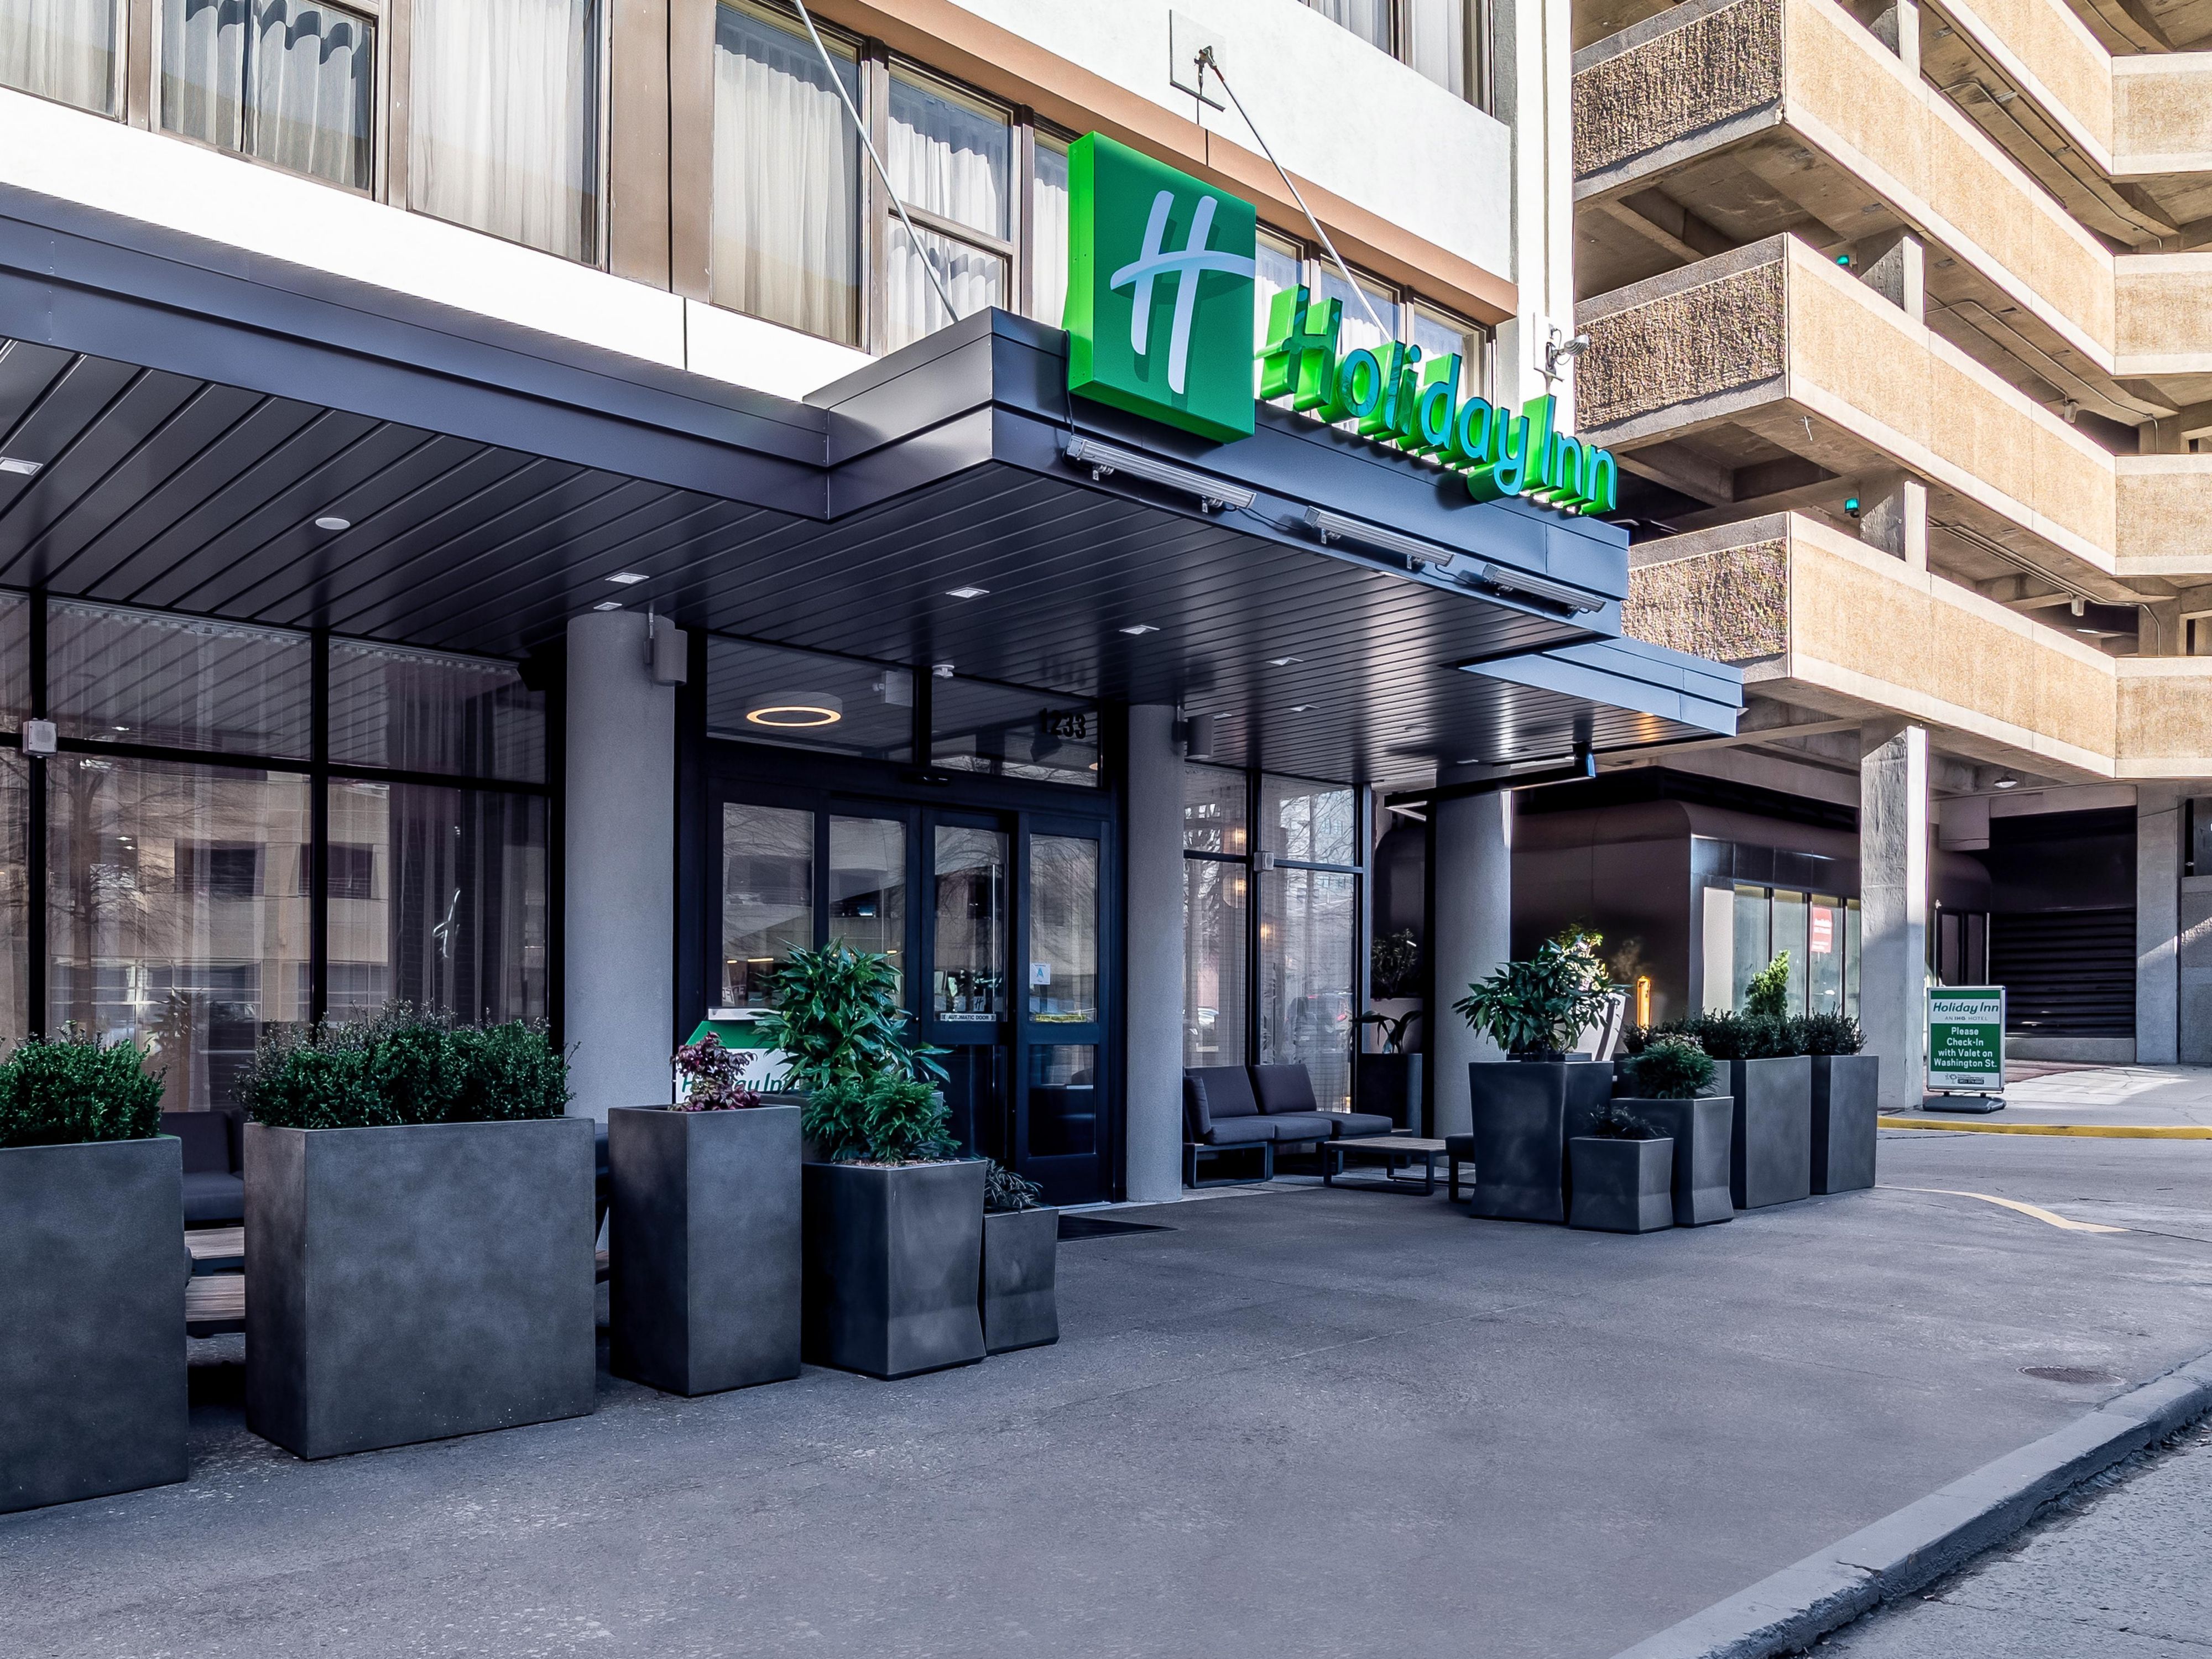 Welcome to a one-of-kind boutique style Holiday Inn where you are treated like family! Centrally located in the heart of Downtown Columbia, SC - you will be within walking distance to many things to do and see in the city. We are excited to have you stay with us!  Check out our Virtual tour of the hotel on Sky Nav by clicking the link below! 